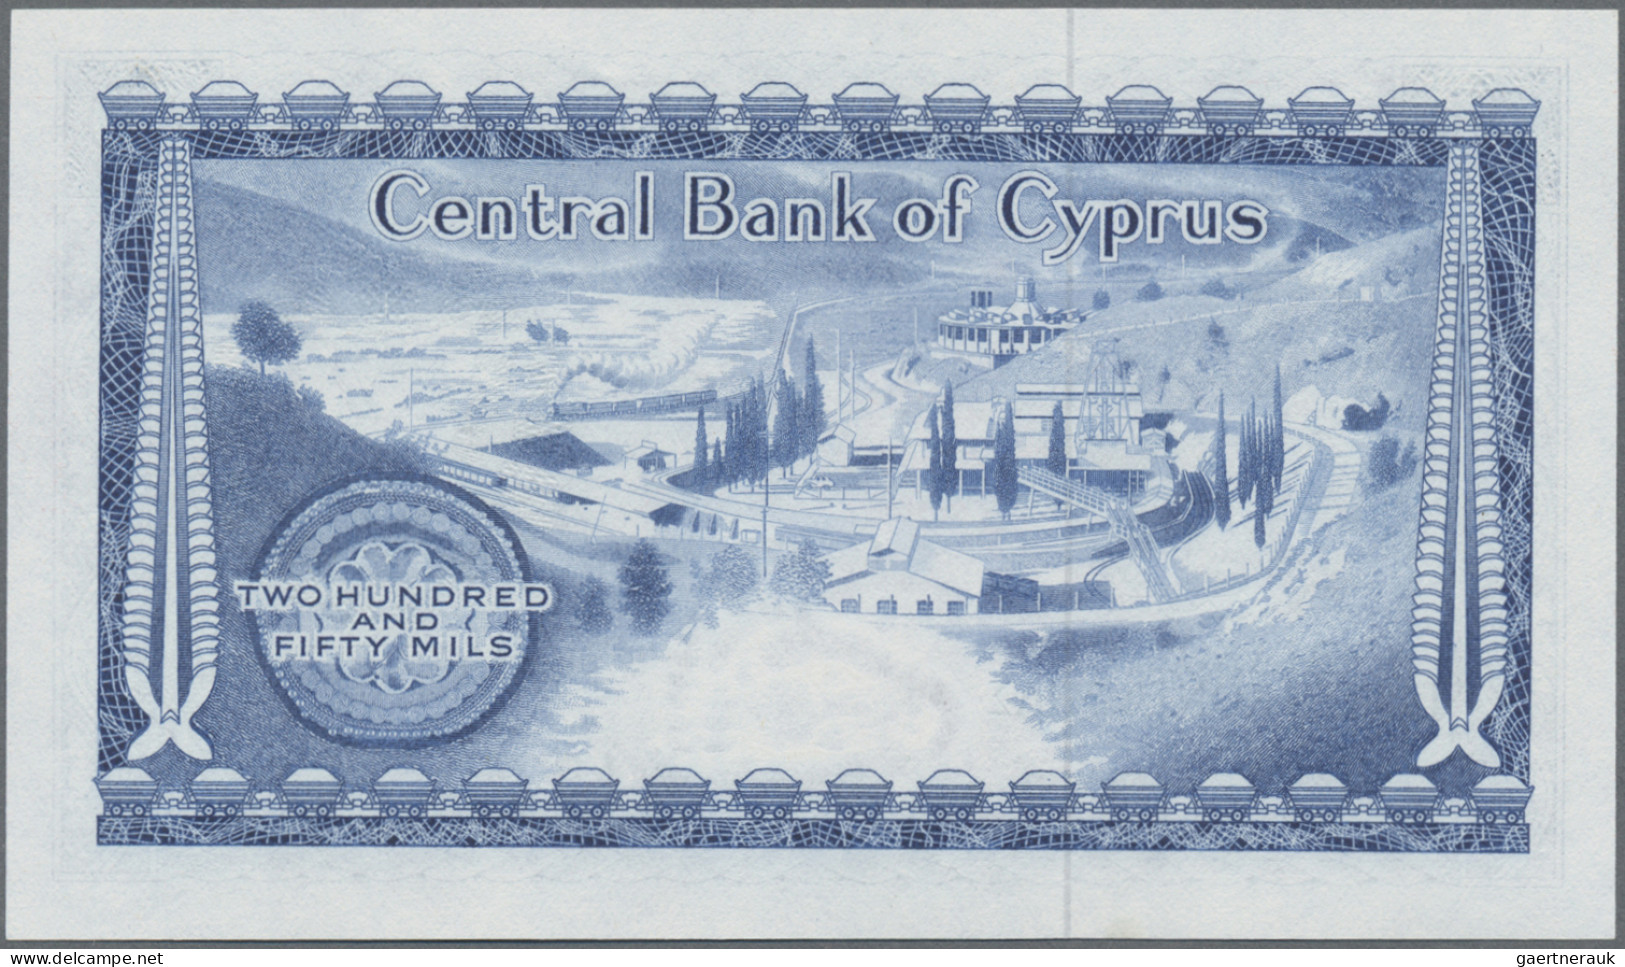 Cyprus: Republic and Central Bank of Cyprus, lot with 5 banknotes, 1961-1982 ser